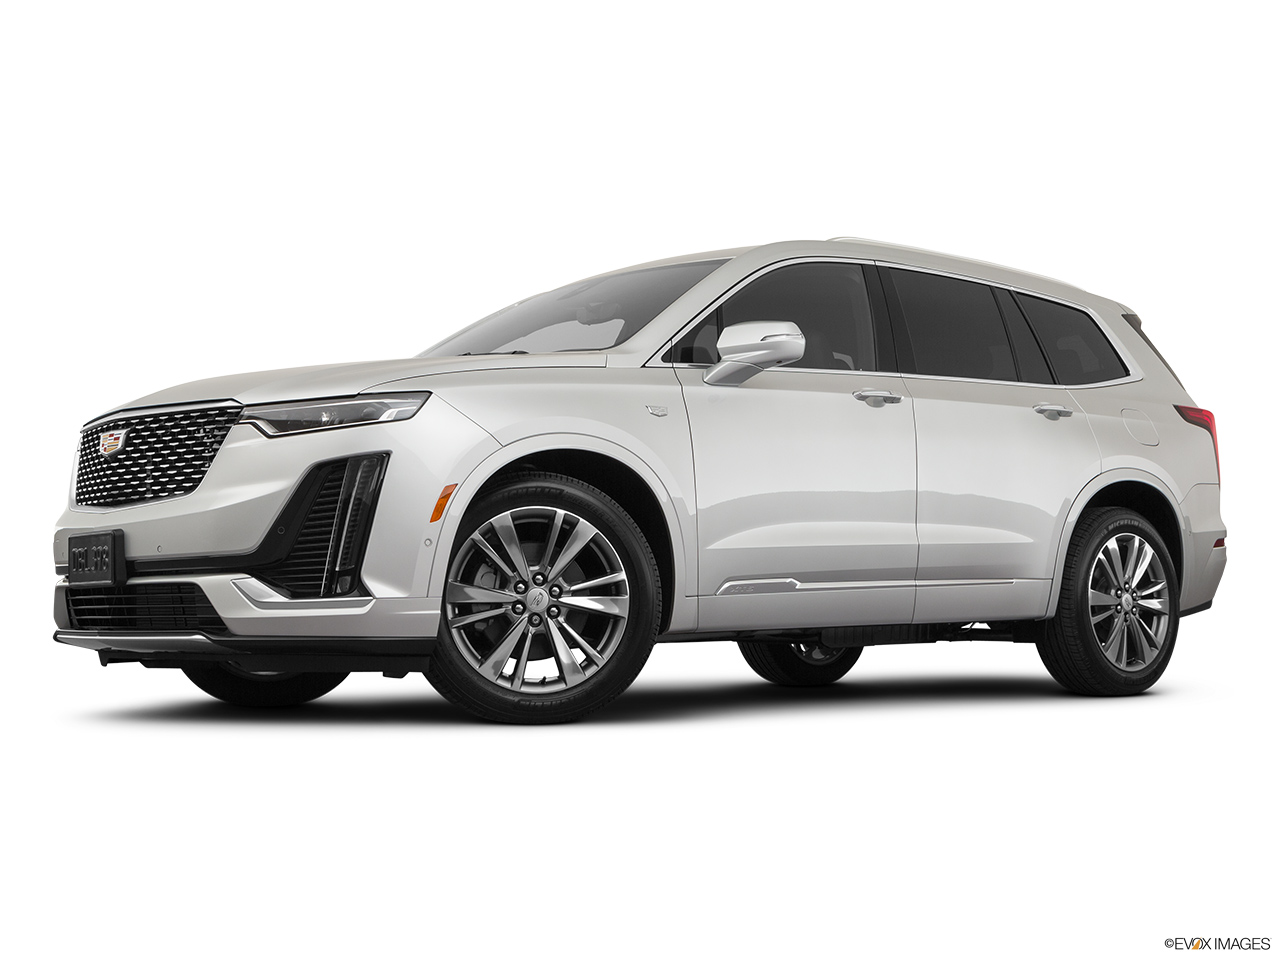 2020 Cadillac XT6 Premium Luxury Low/wide front 5/8. 